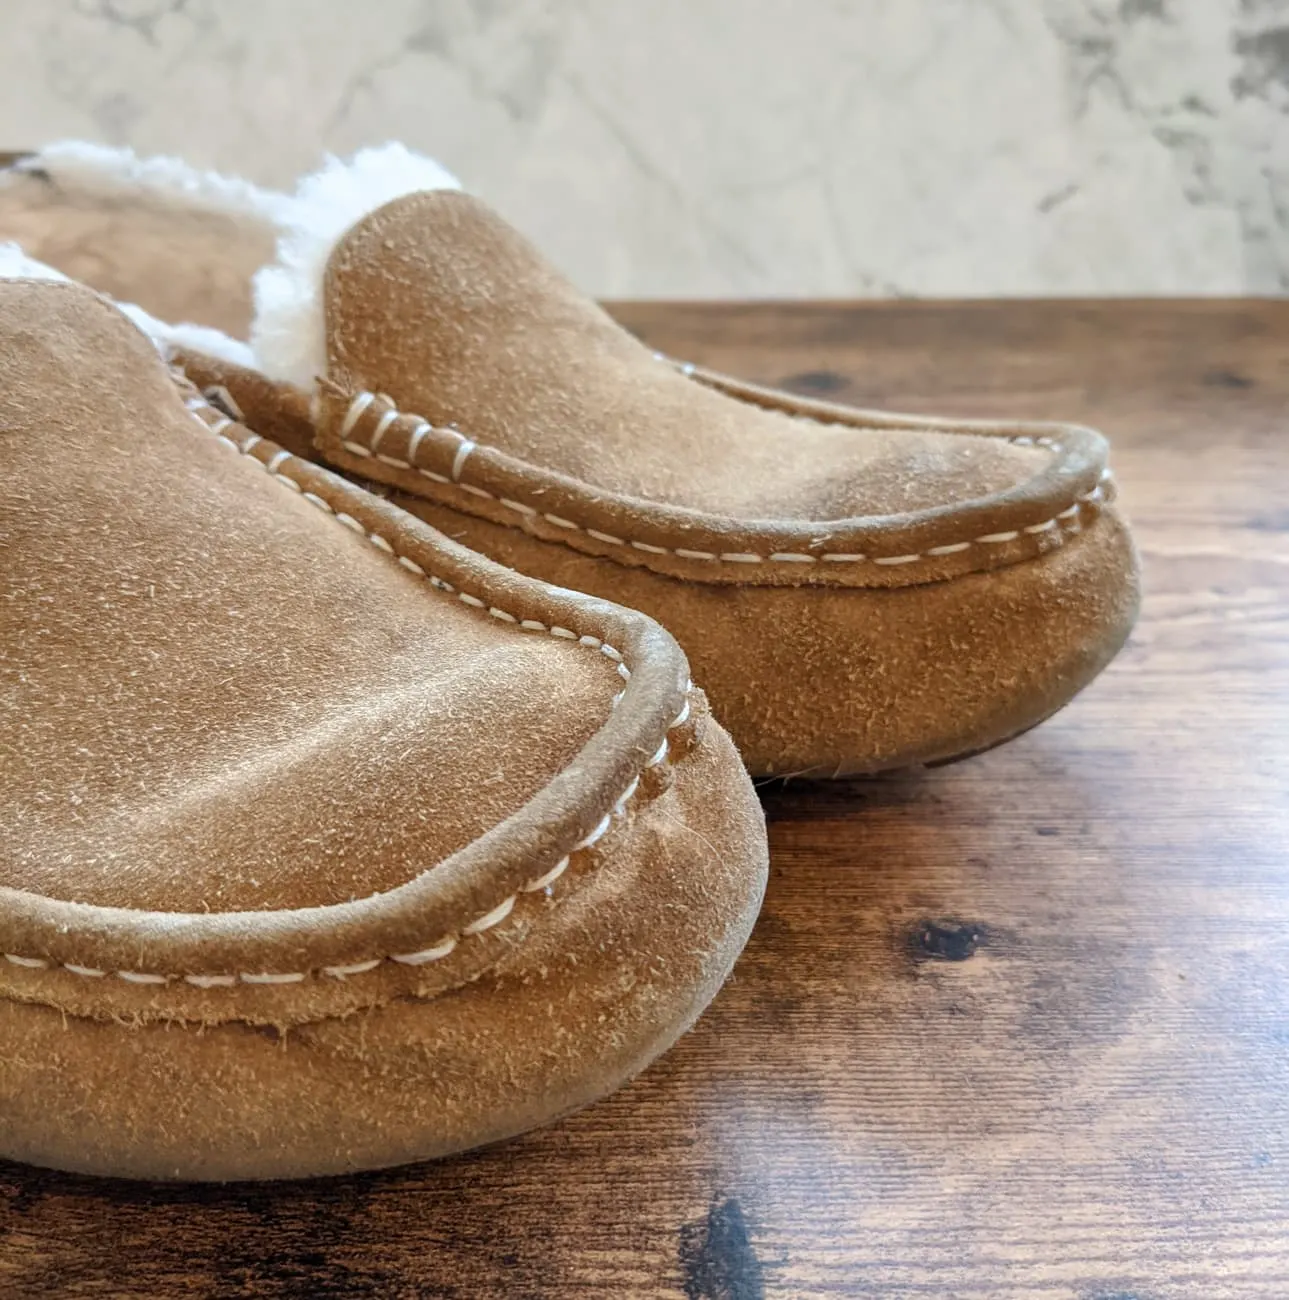 Give rights Abandonment Pasture How to Clean & Condition Suede & Sheepskin Lined Shoes - Hawk Hill